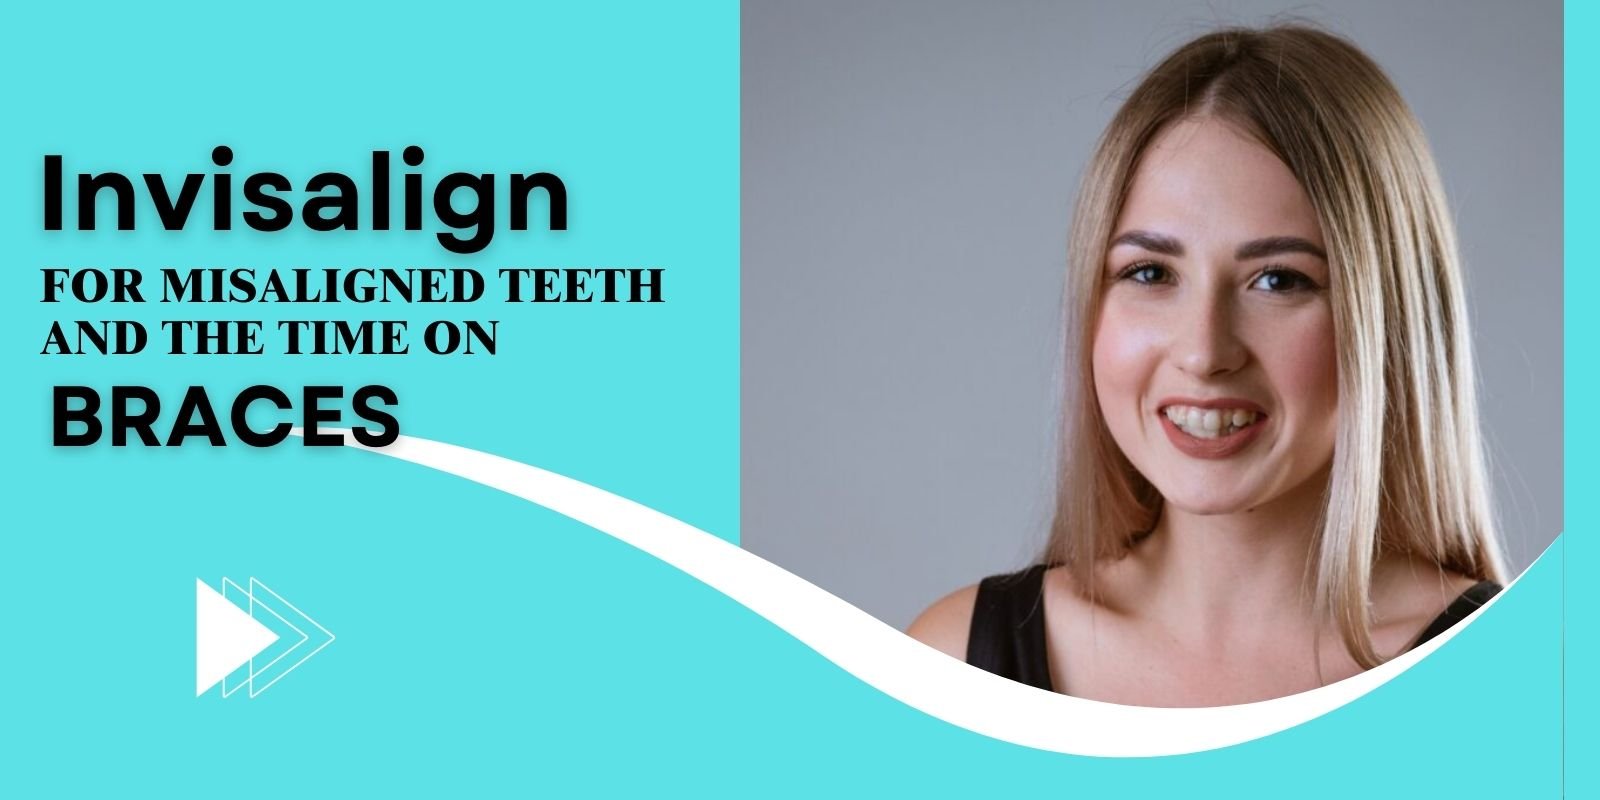 Invisalign for misaligned teeth and the time on braces